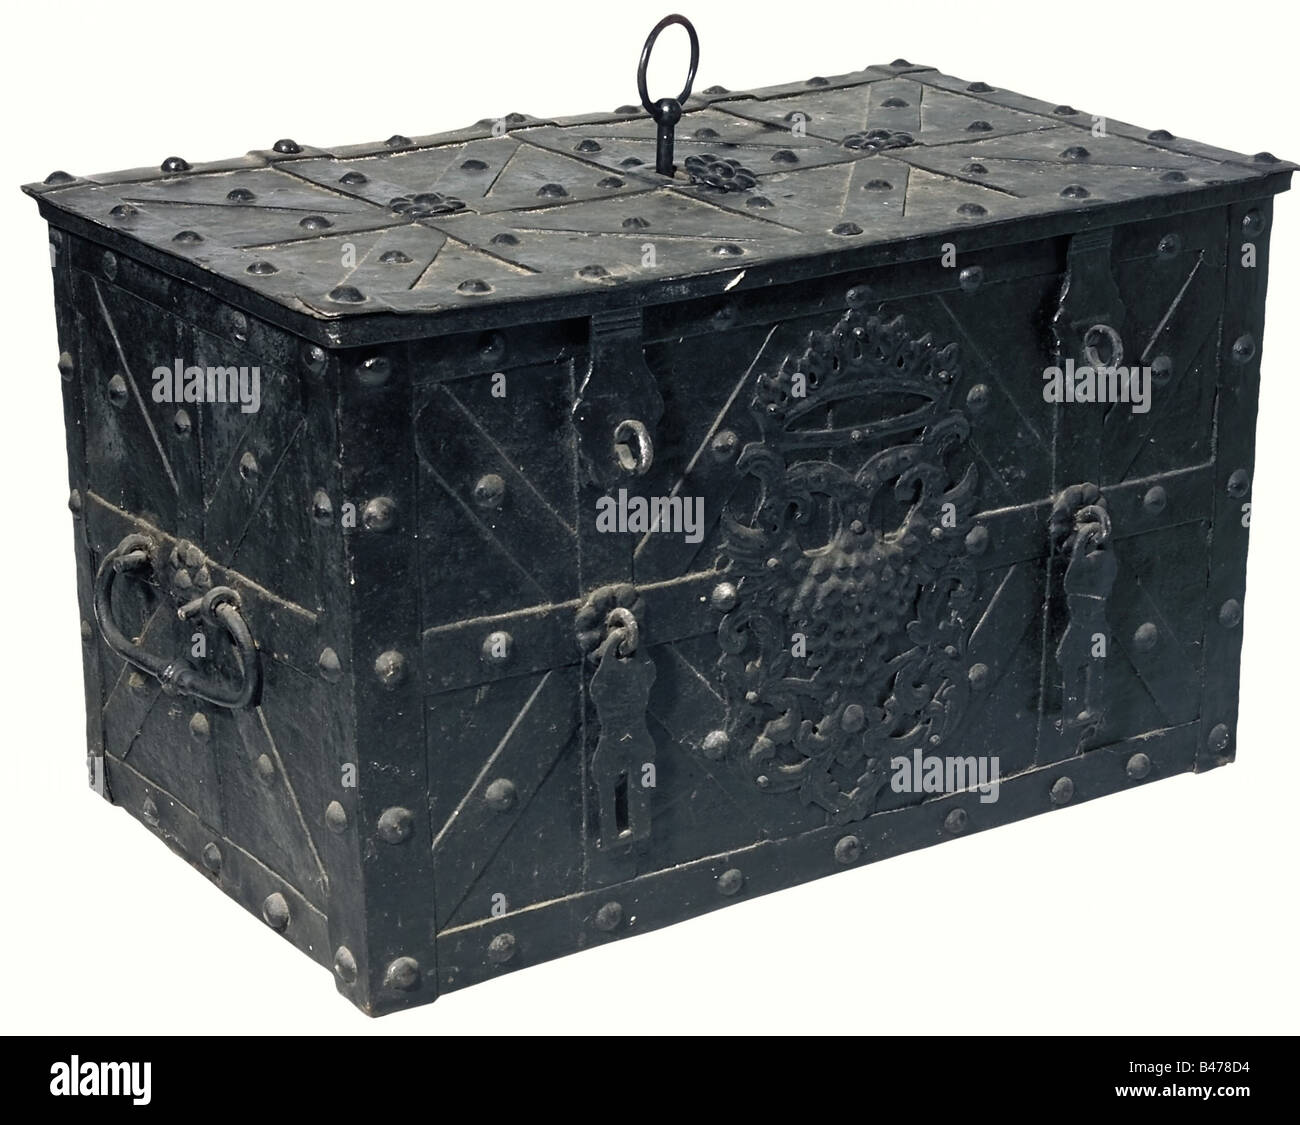 A large German strongbox, 17th/18th century. A rectangular trunk of iron plate furnished with straps and stud rivets. The lid has a central keyhole, a spring loaded lock cover, lock with a hollow shank key and nine wards. The lock mechanism has a simple cover plate. The front bears a decorative double headed eagle, and two hasps for locks. There are two movable carrying handles on the sides. The interior has been recently lined with wood. Dimensions 55 x 91 x 55 cm. historic, historical,, 18th century, 17th century, handicrafts, handcraft, craft, object, object, Stock Photo